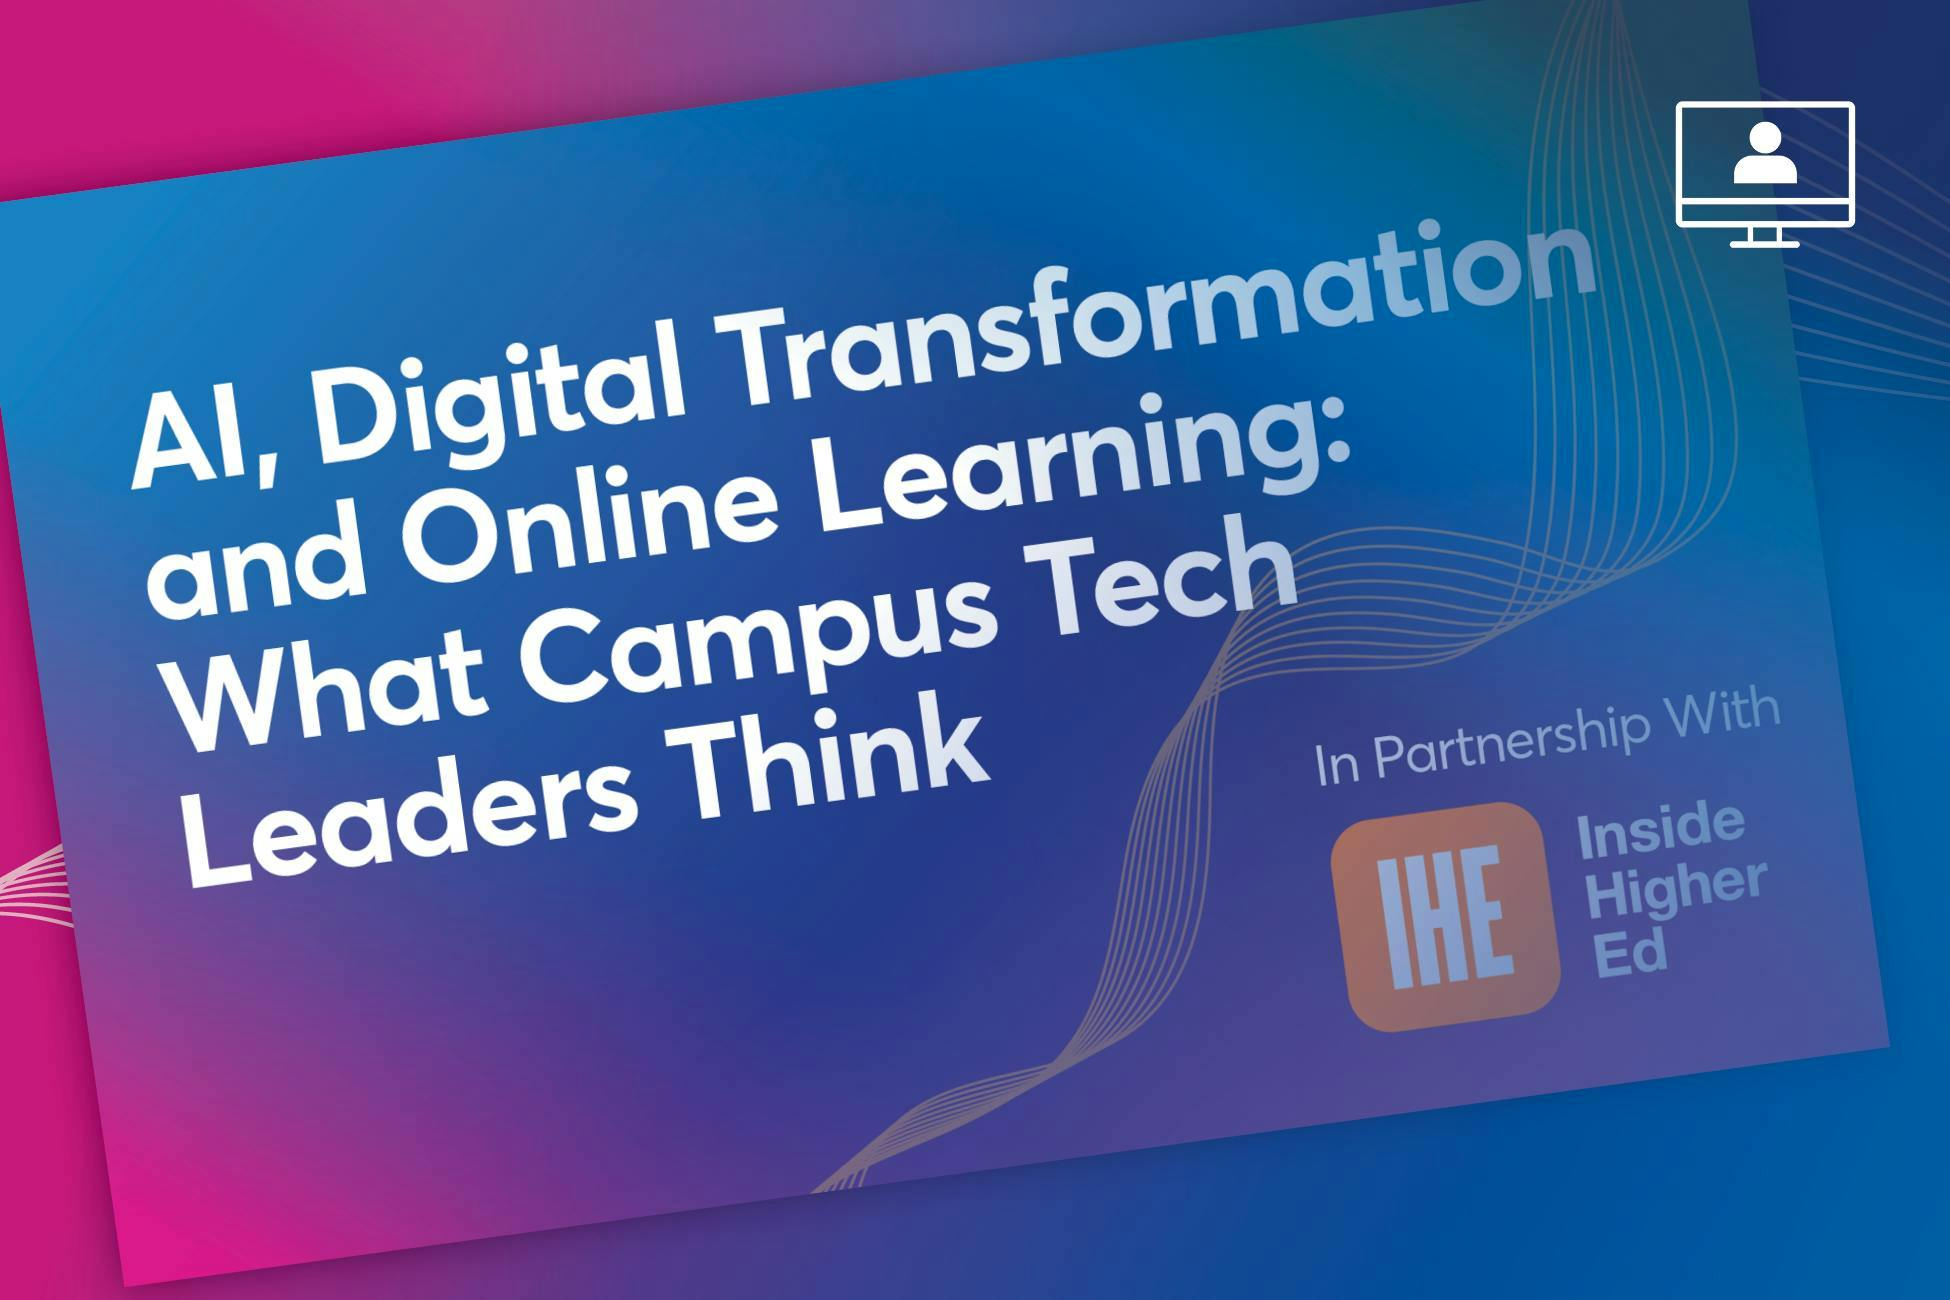 AI, Digital Transformation and Online Learning: What Campus Tech Leaders Think